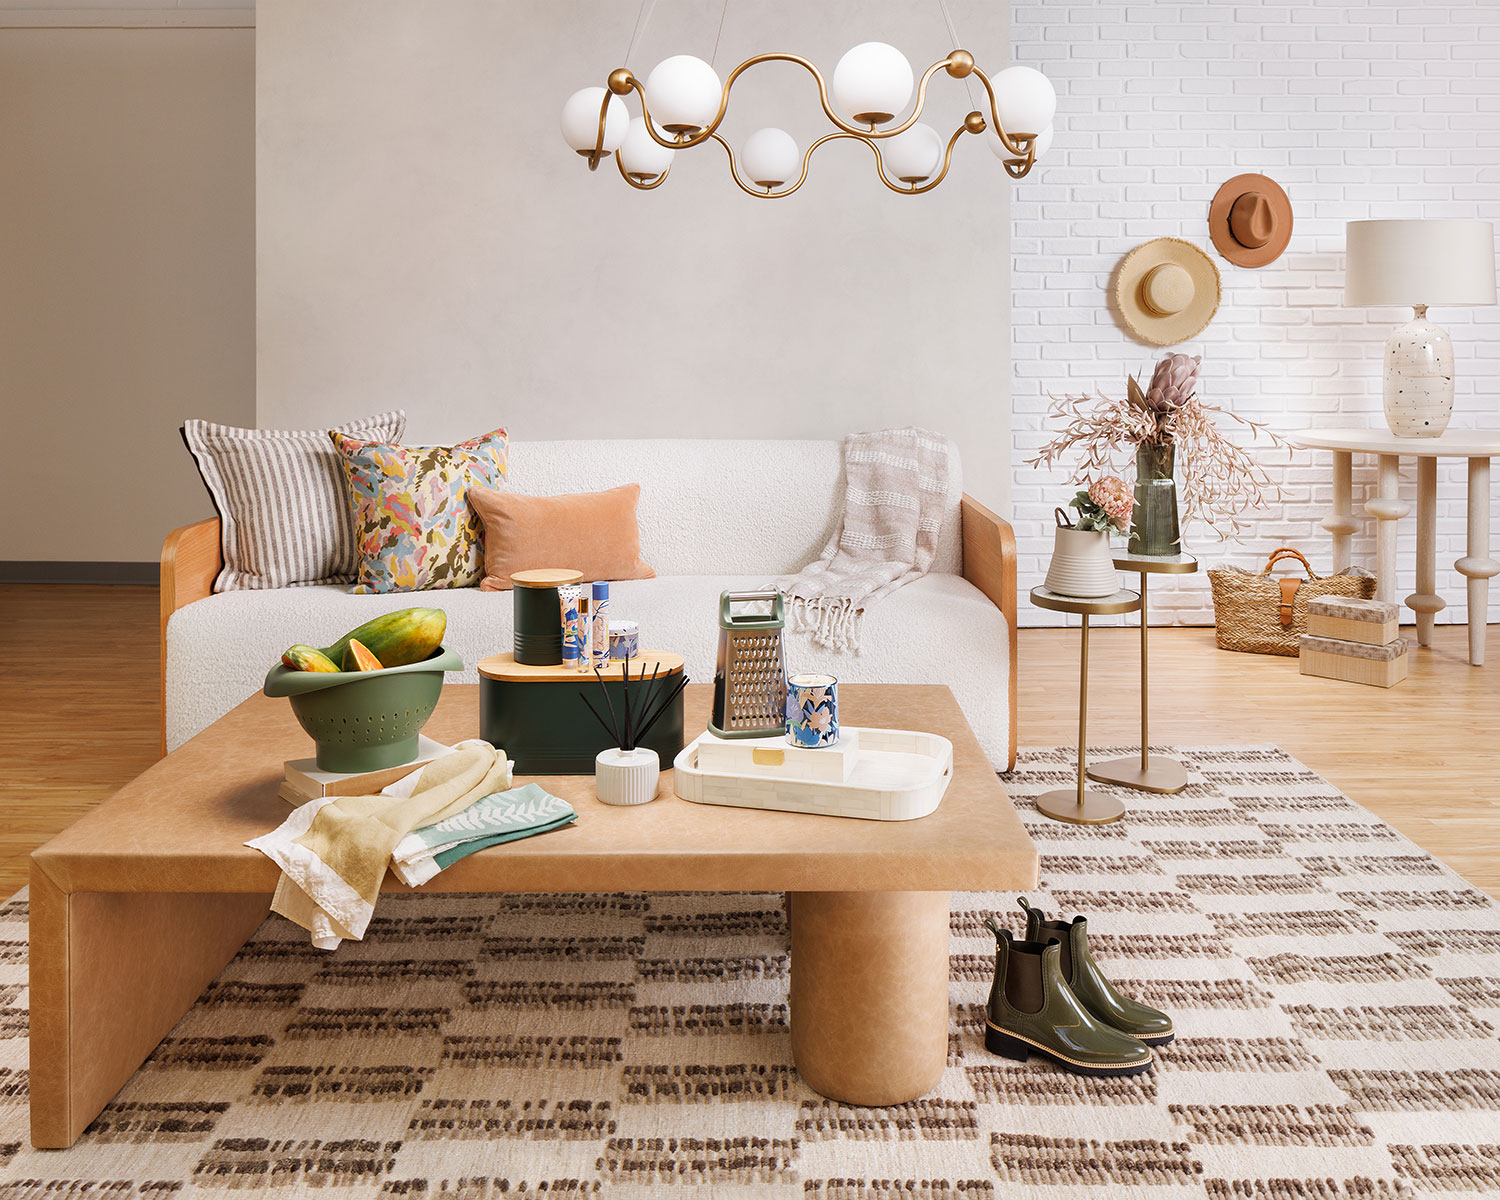 midcentury-inspired living room with tans, browns and white representing americasmart 